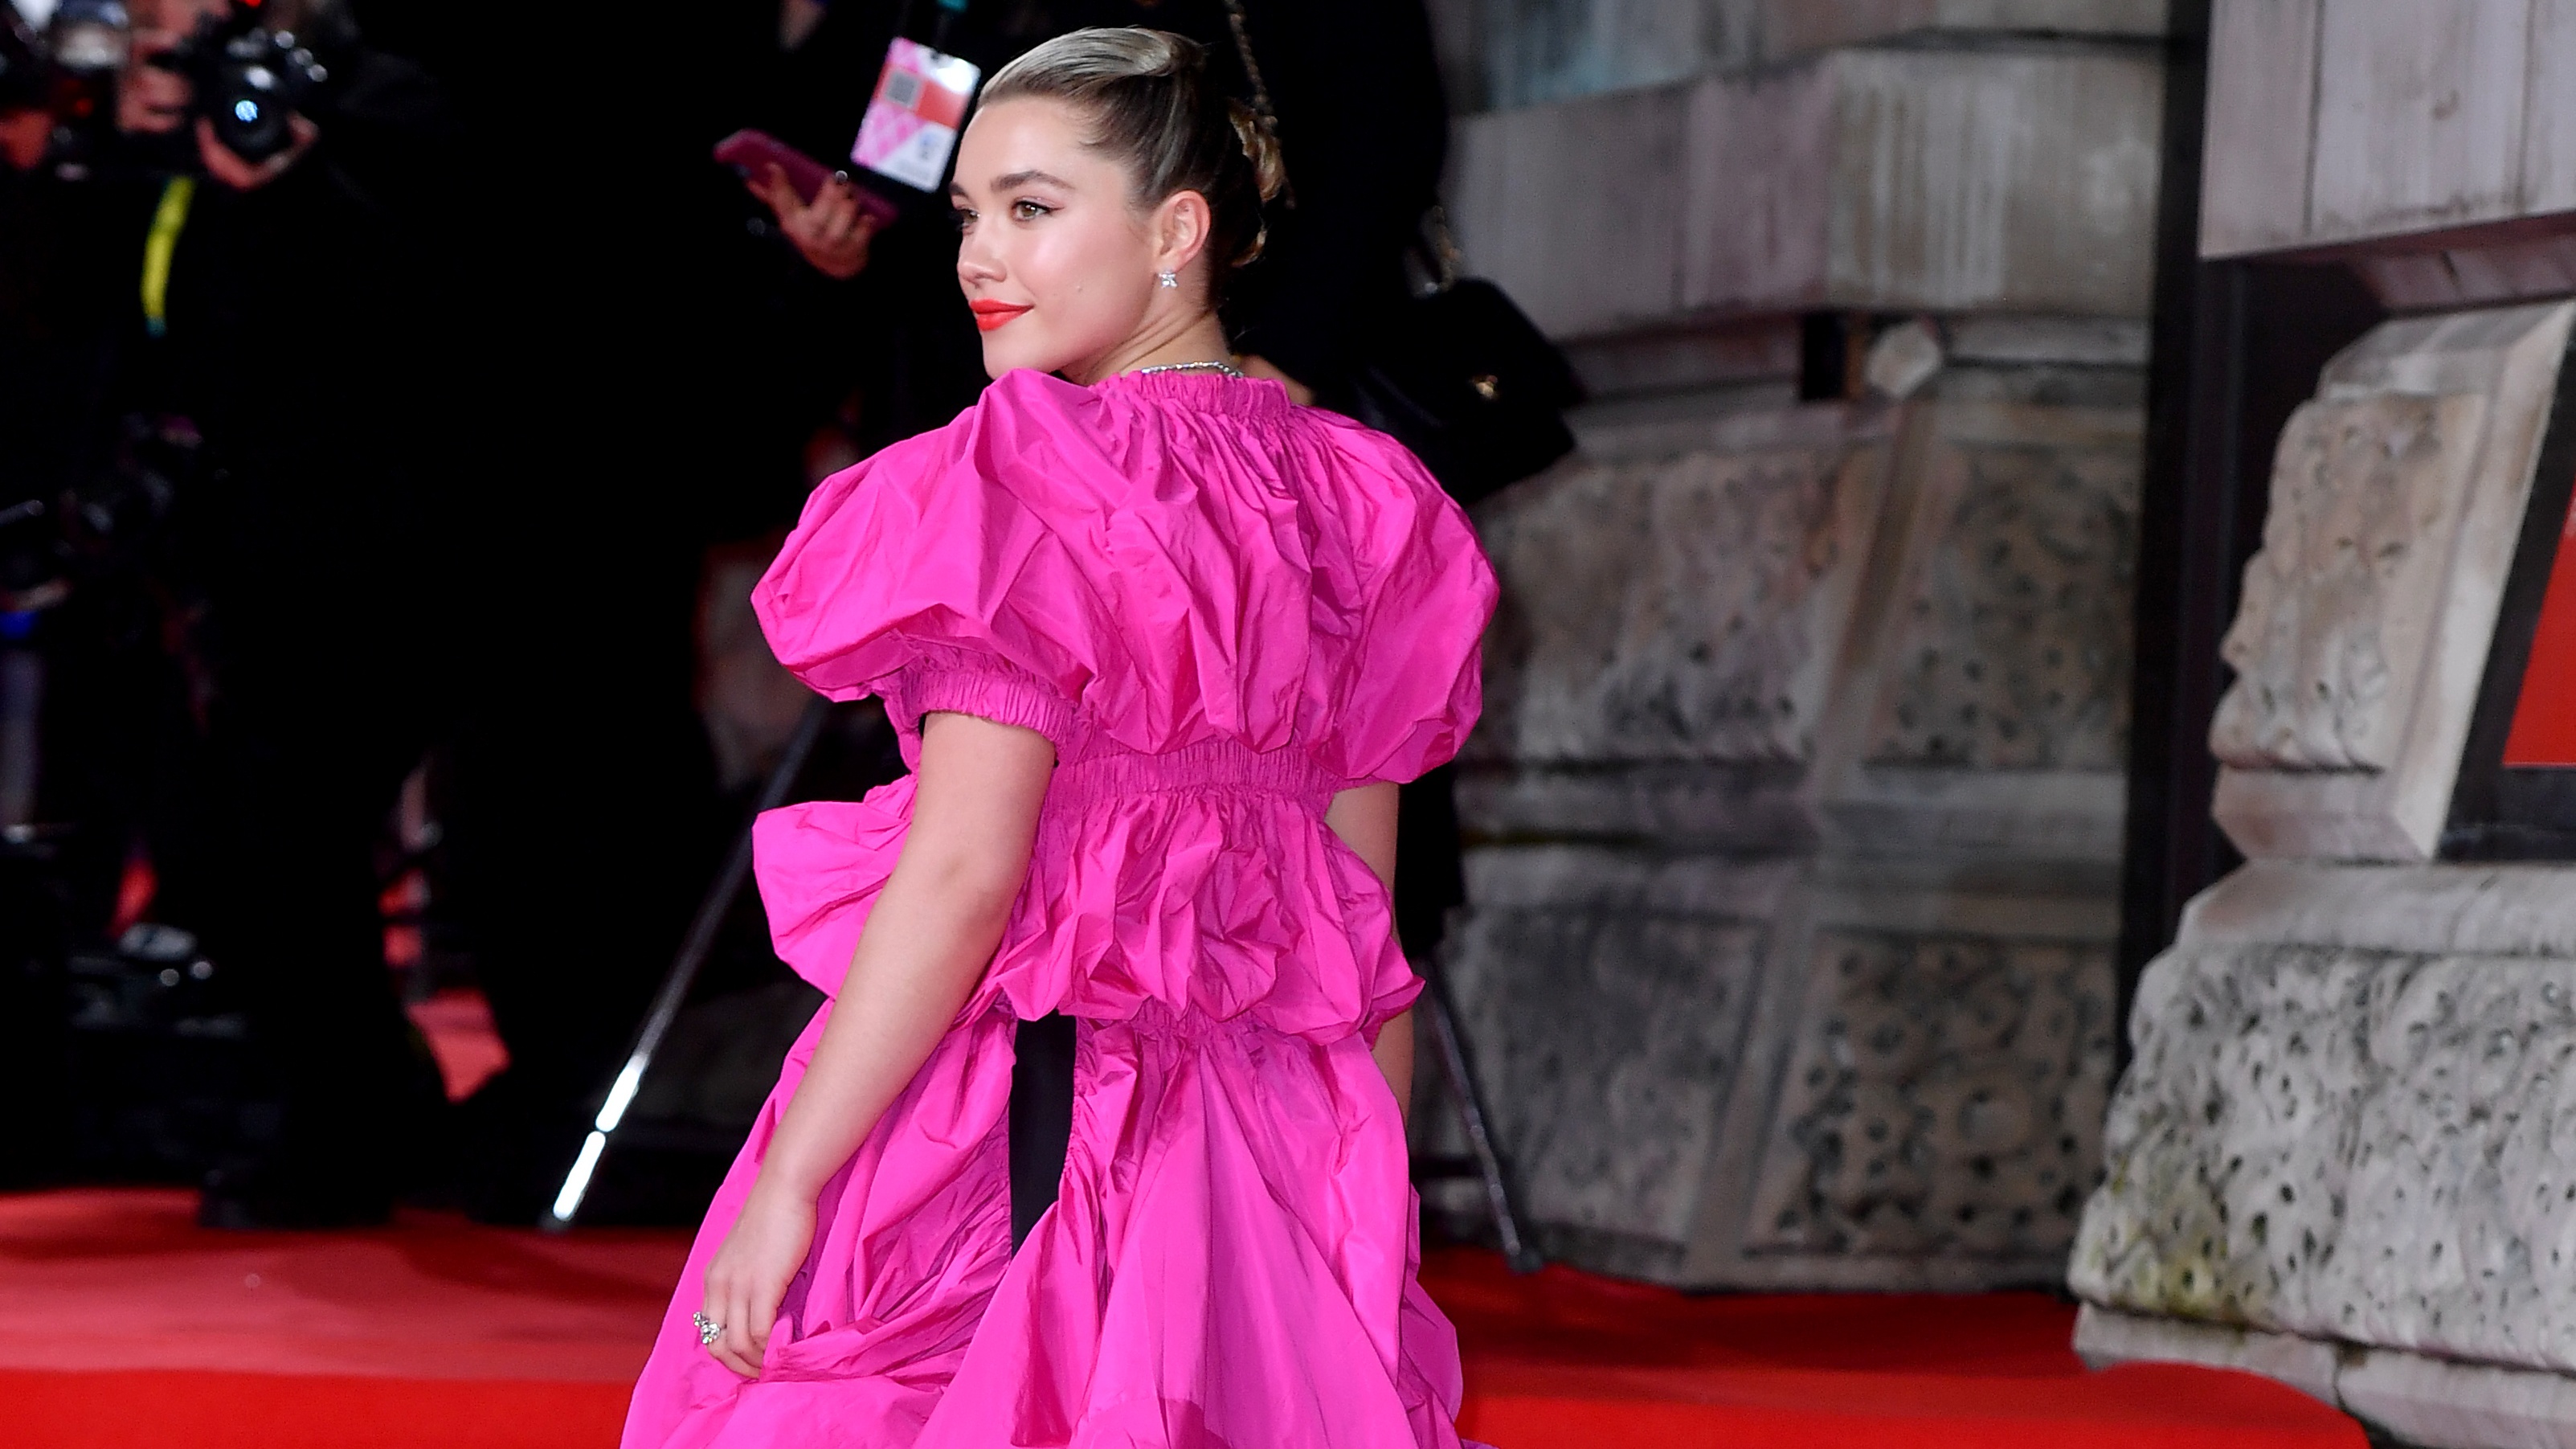 Baftas 2020 Florence Pugh Arrives In Stunning Hot Pink Gown 3220